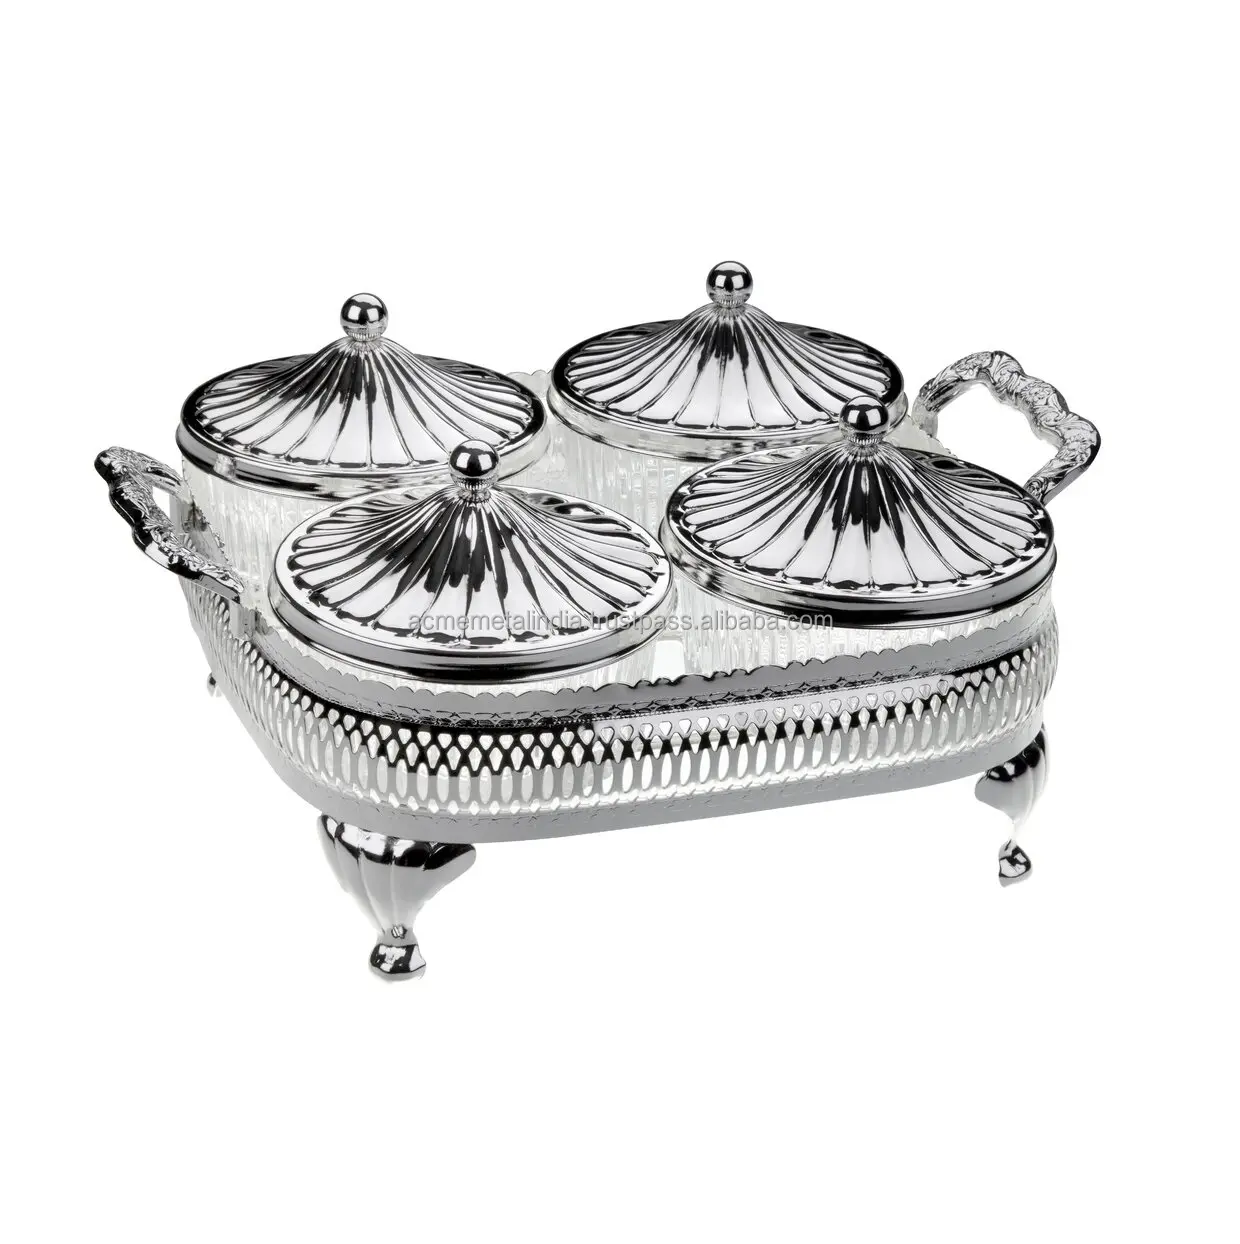 Food Buffet Dish Standard Design With Silver Color Best Stainless Steel Kitchen & Restaurant Accessories Hot Sell Promotional